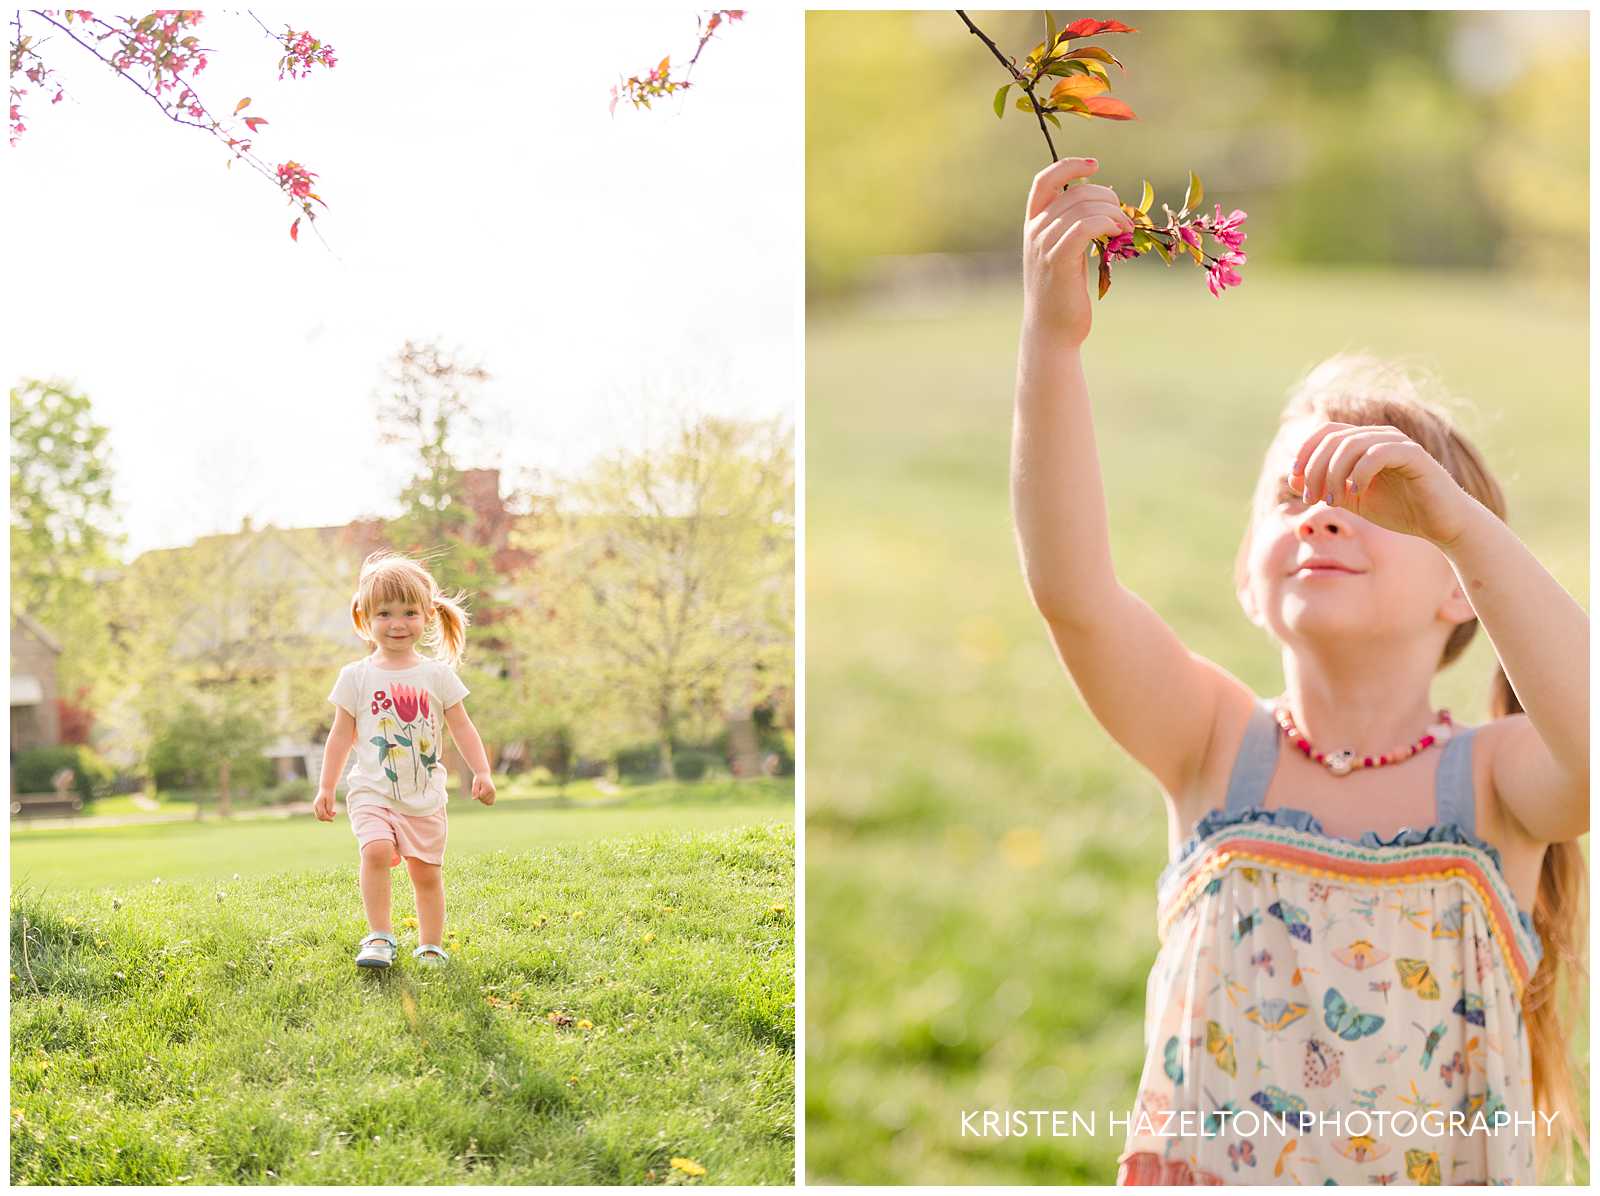 Young girl reaching for a crabapple blossom branch